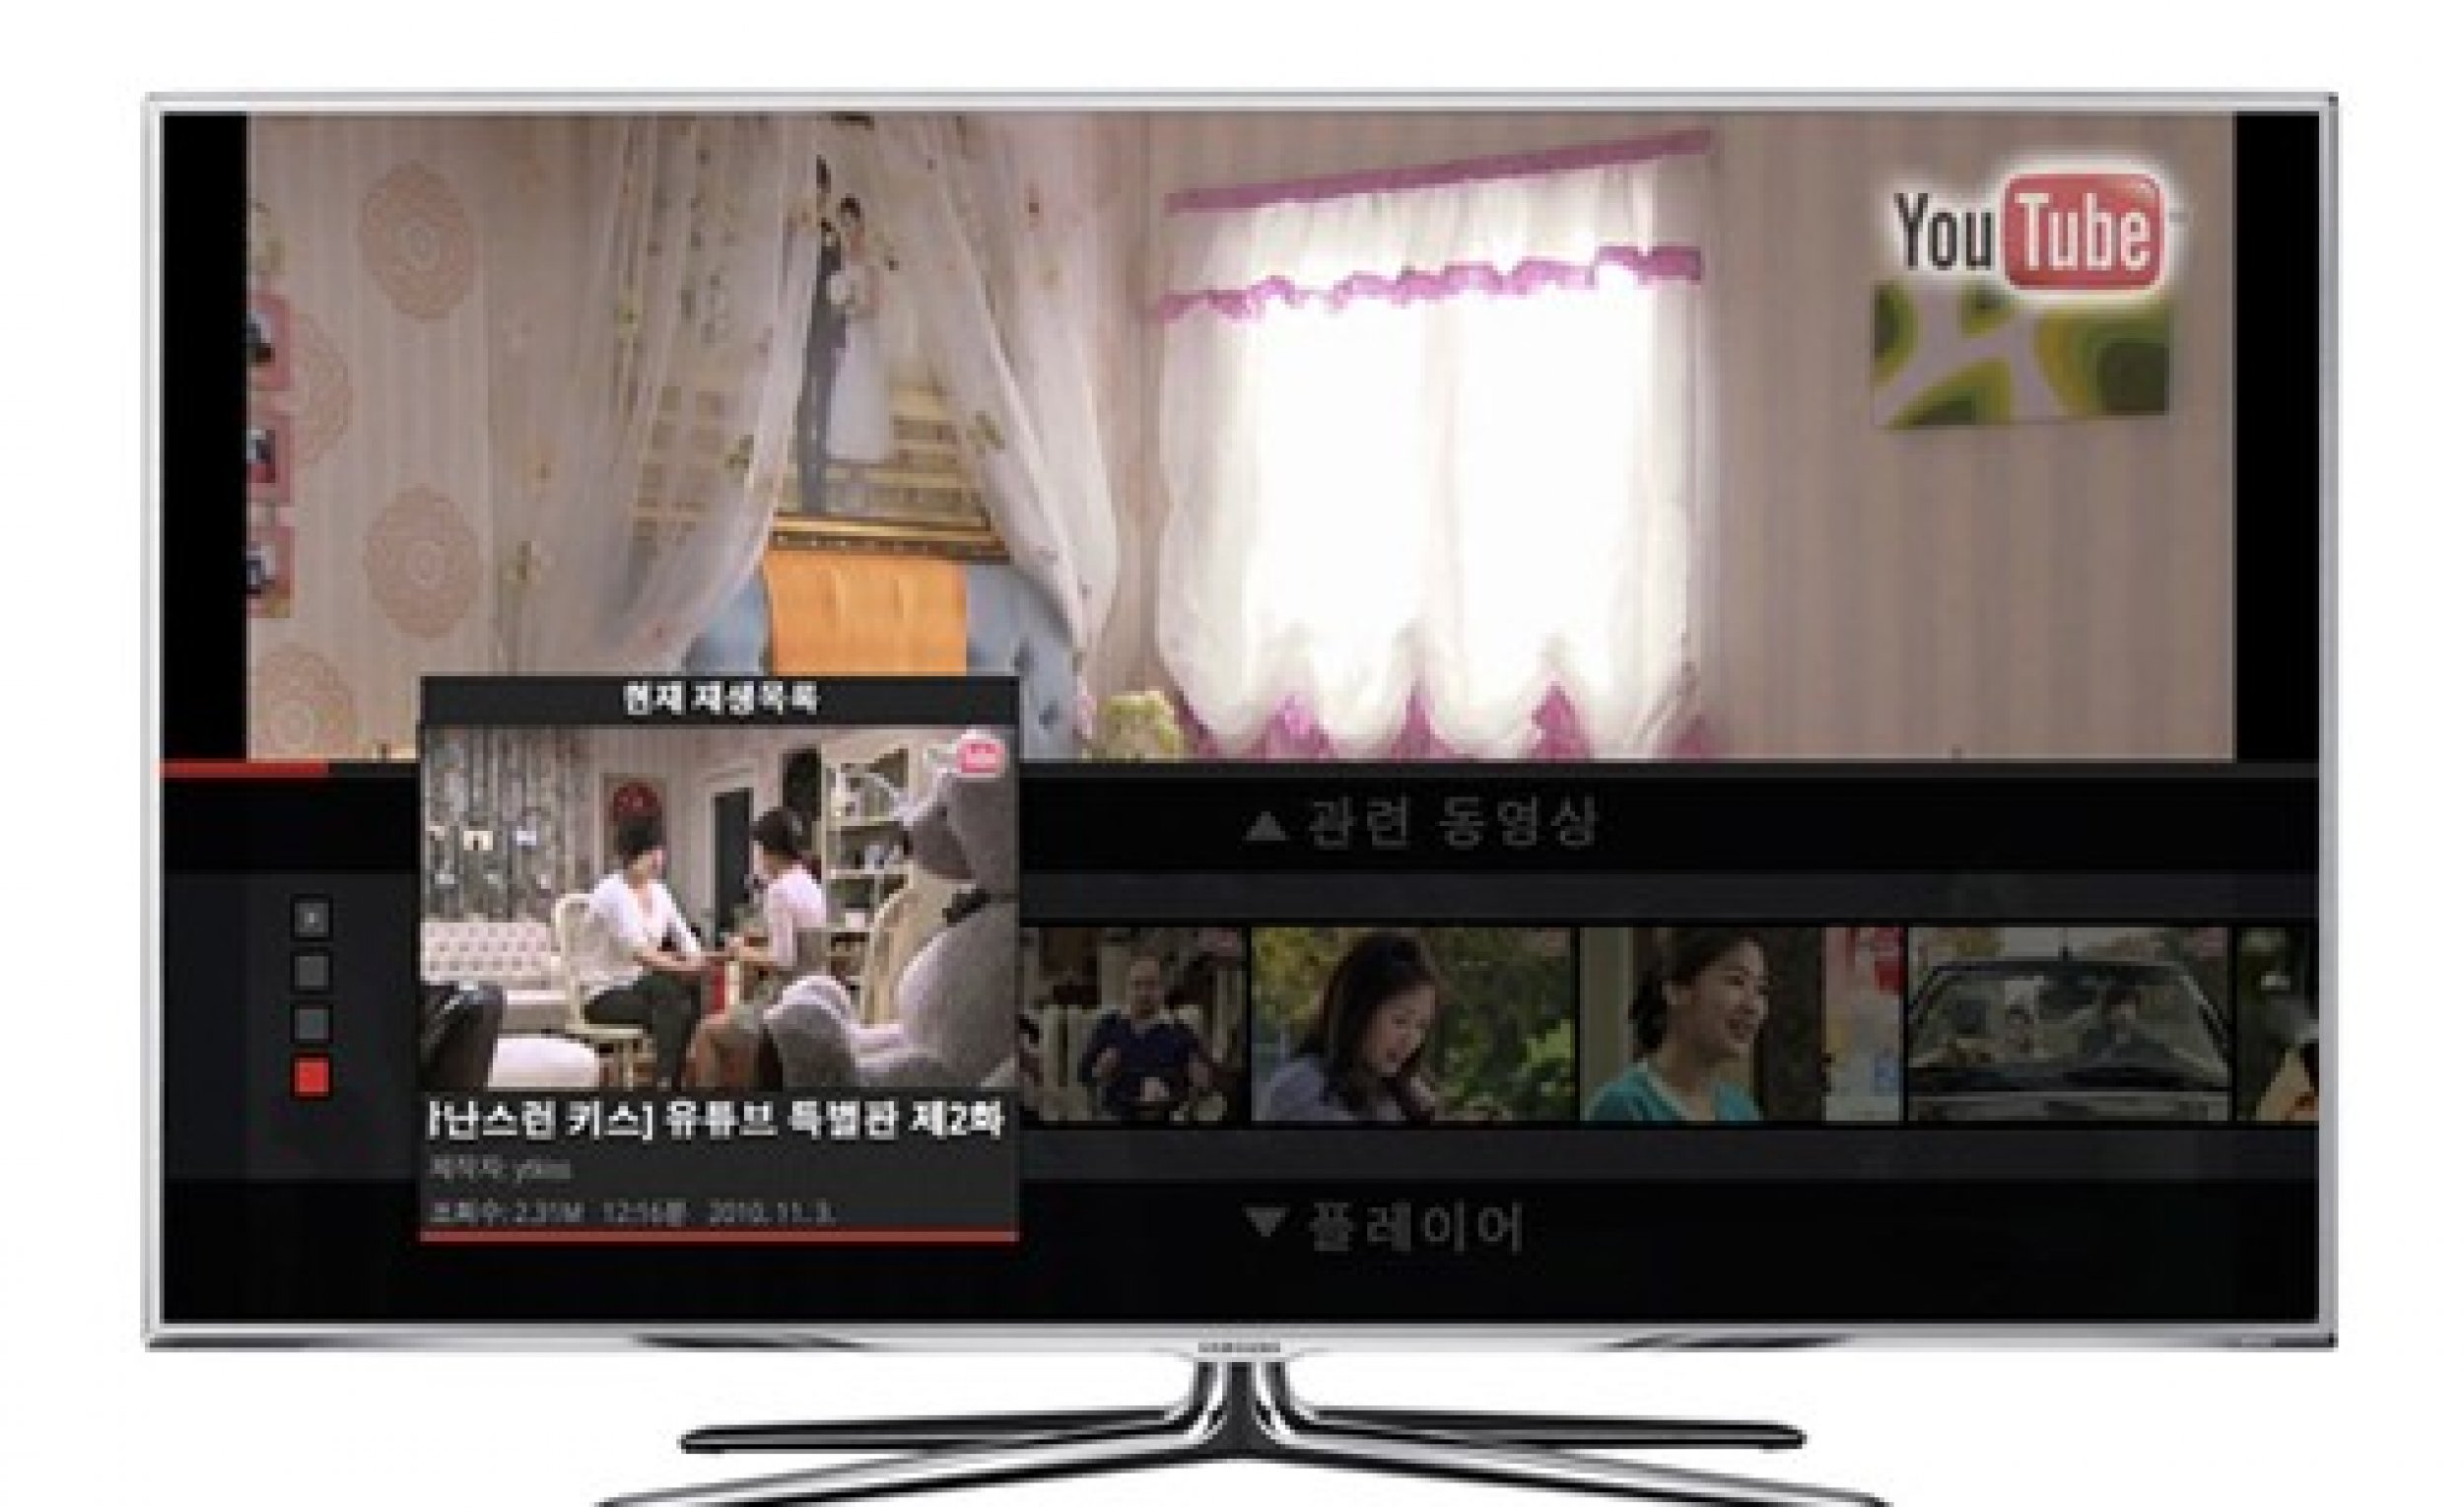 039Youtube on TV039 service in Samsung Smart TV